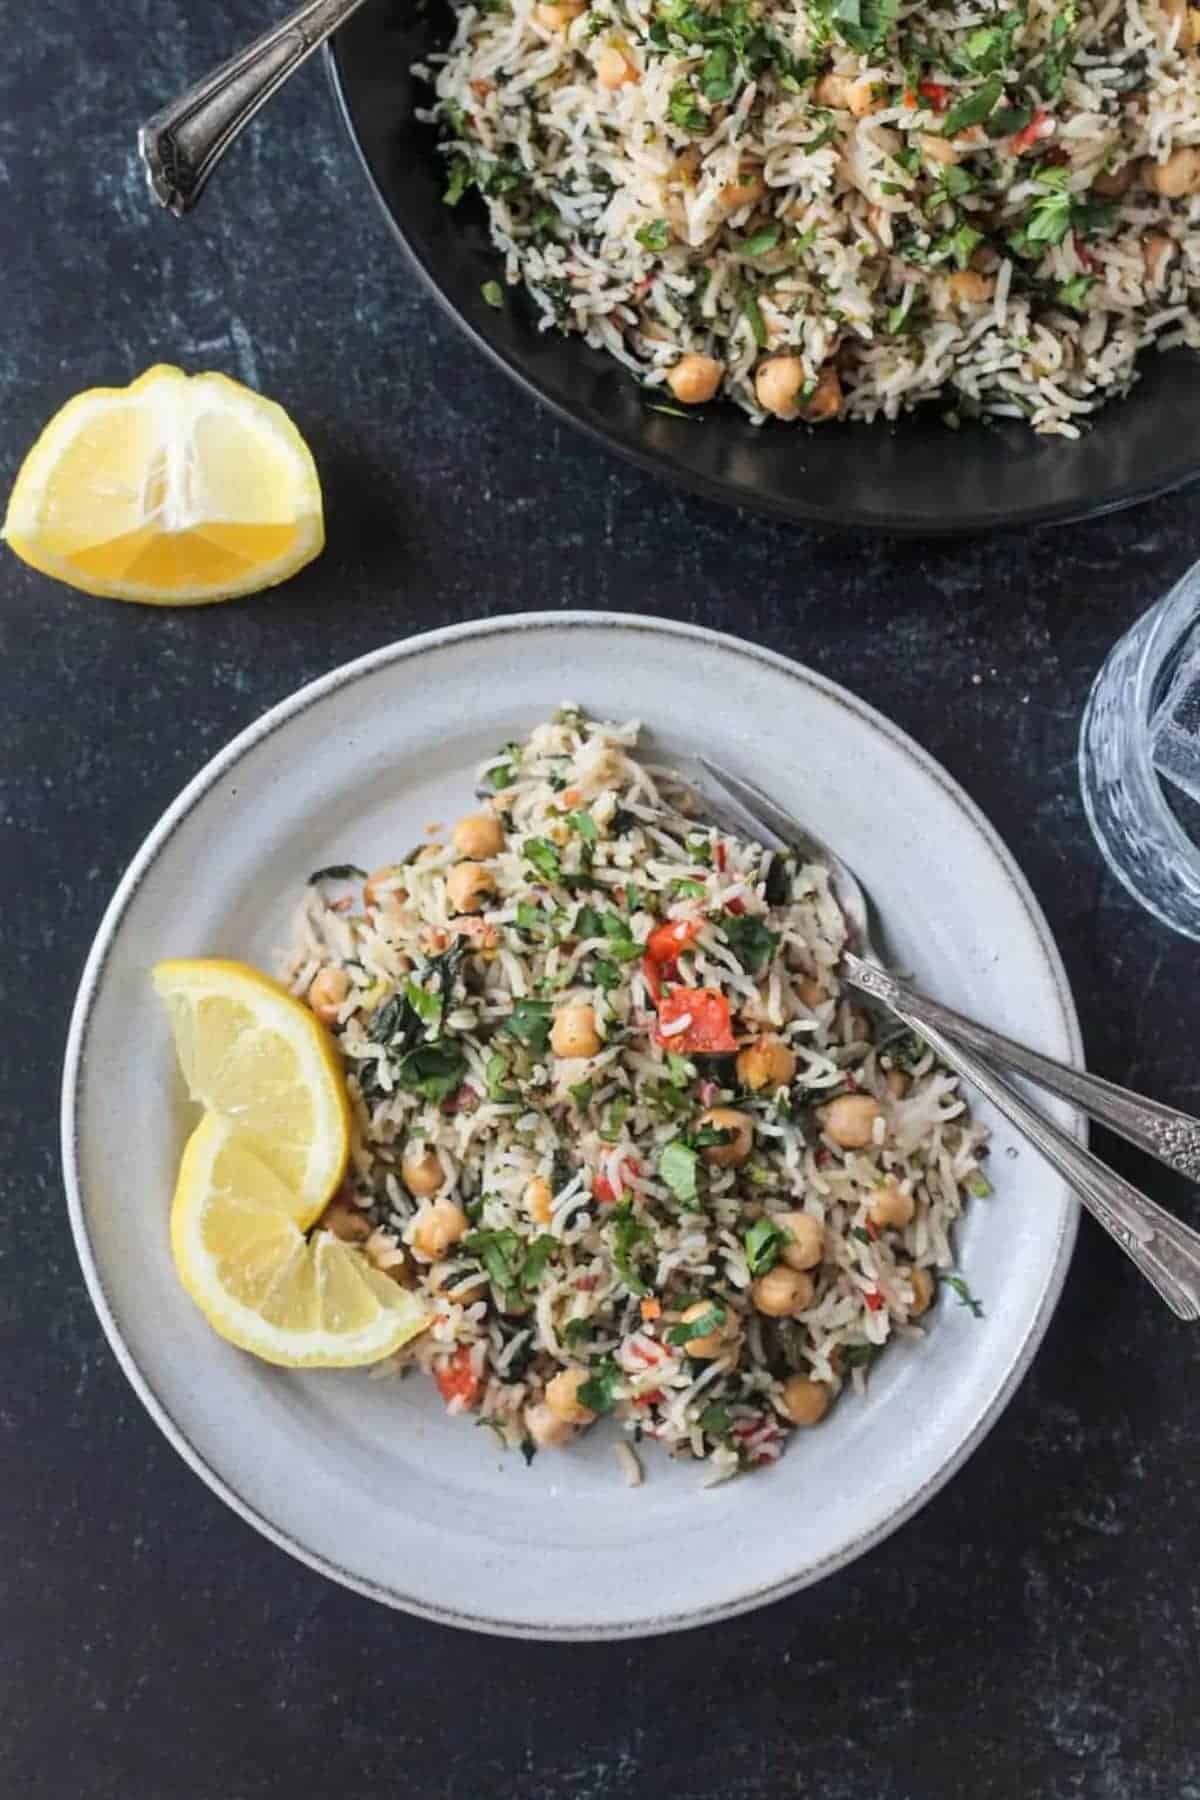 Spinach rice and chickpeas on a plate with a fork and spoon and two lemon slices.